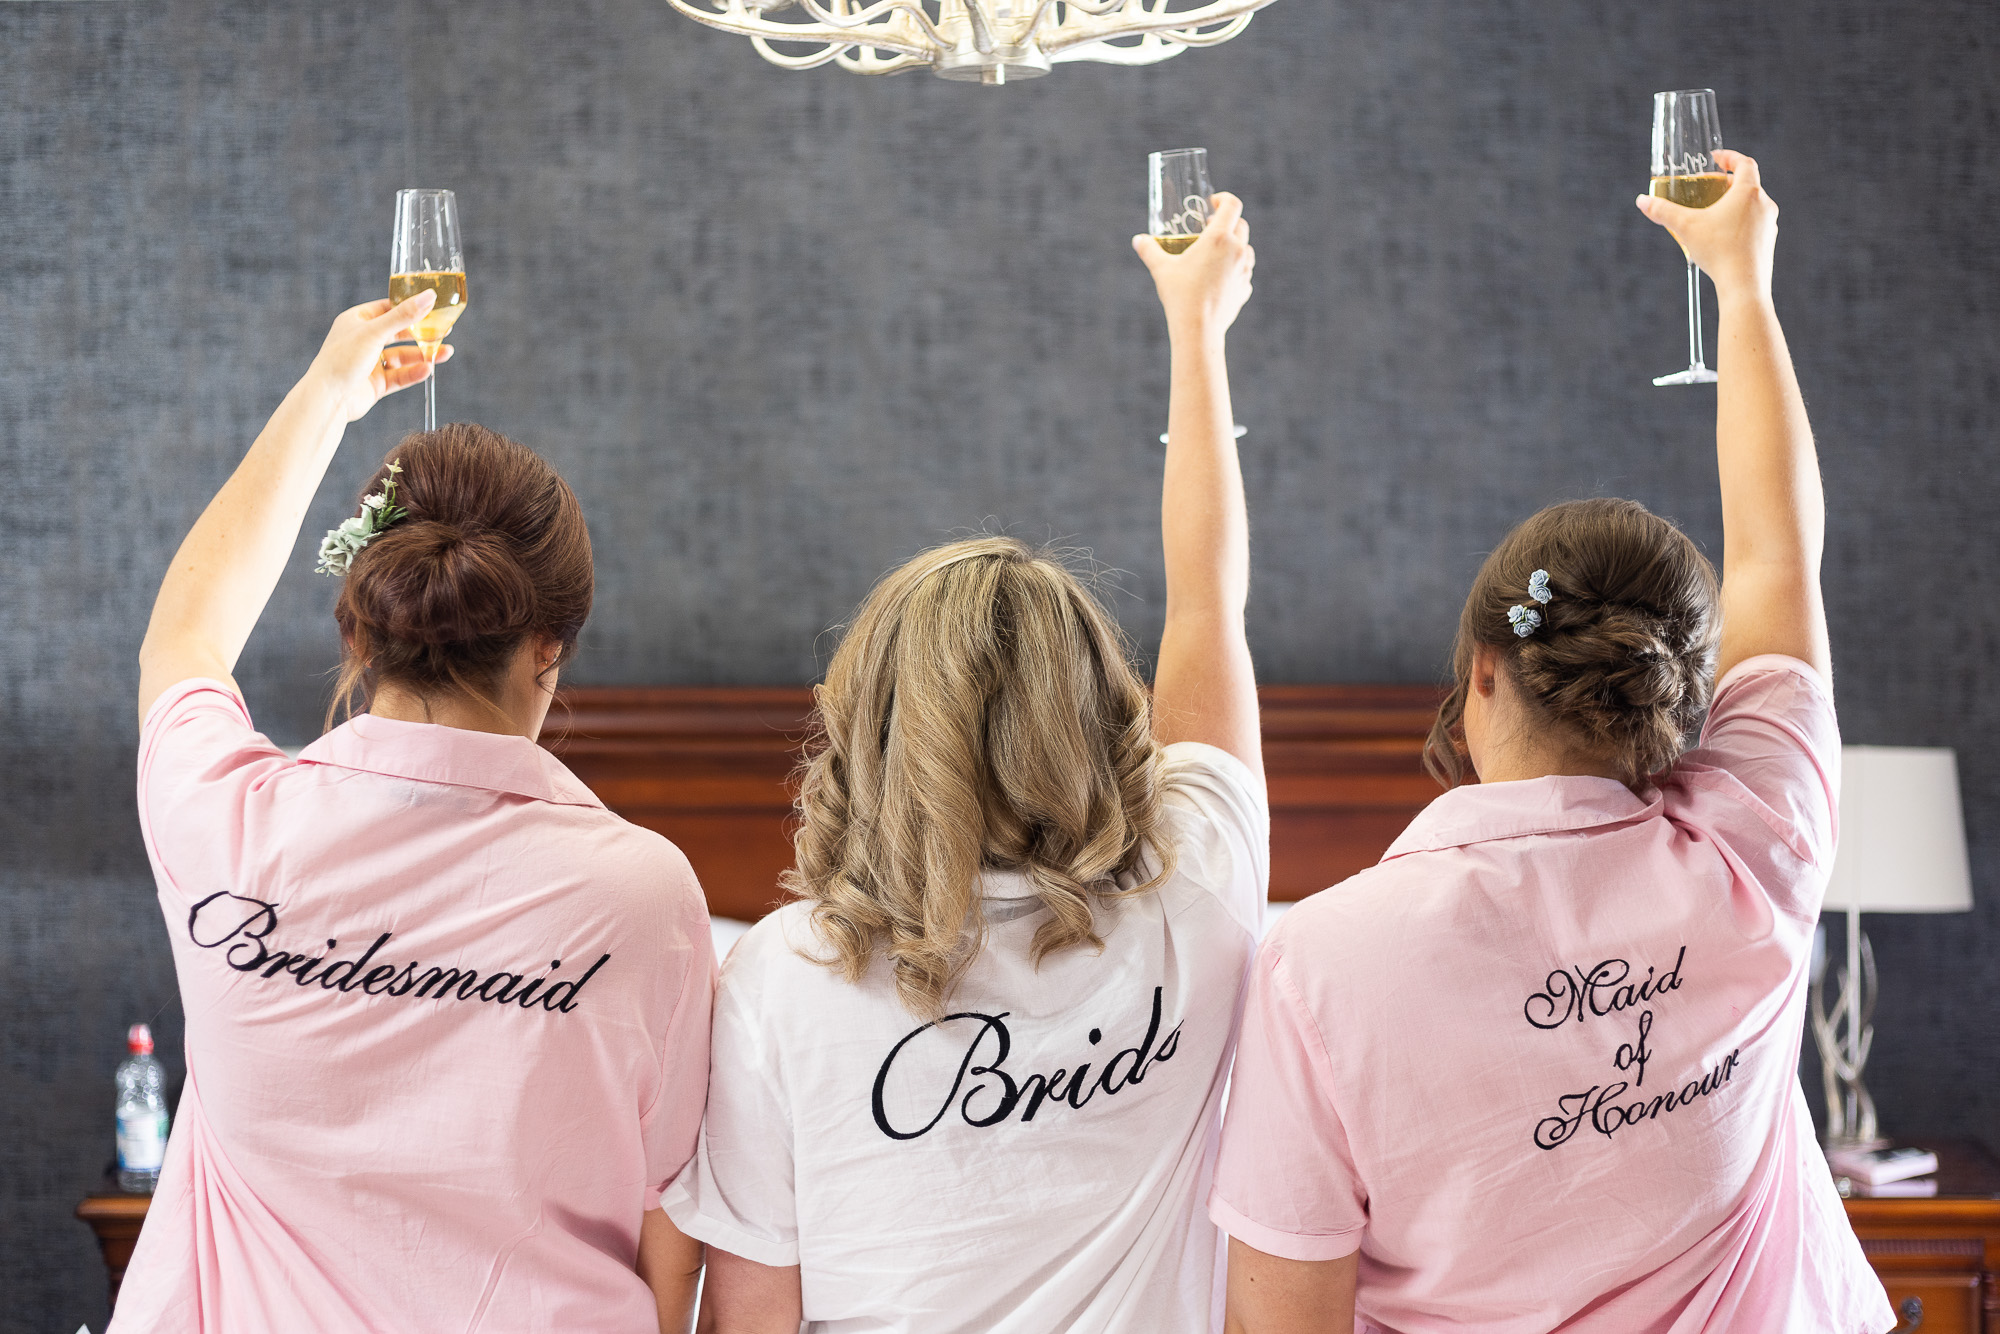 A bridal party hold up drinks with their backs turned away, on the back of their pyjamas it reads Bridesmaid (Pink pyjamas), Bride (White pyjamas), Maid of honour (Pink pyjamas). They are in a hotel room hours before the ceremony.